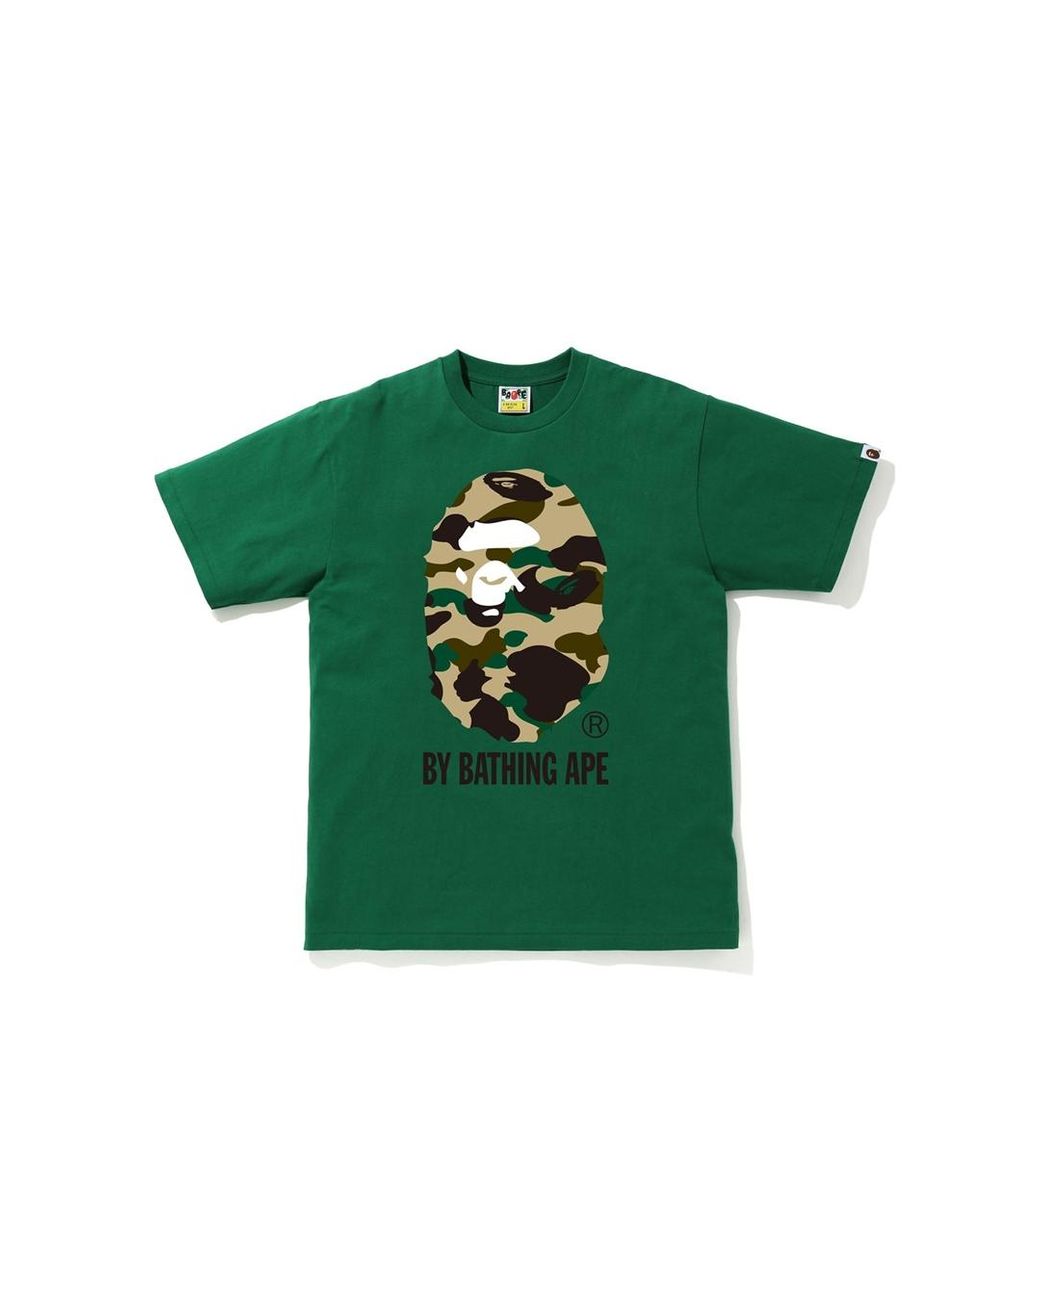 A Bathing Ape 1st Camo By Bathing Ape Tee in Green/Yellow (Green) for